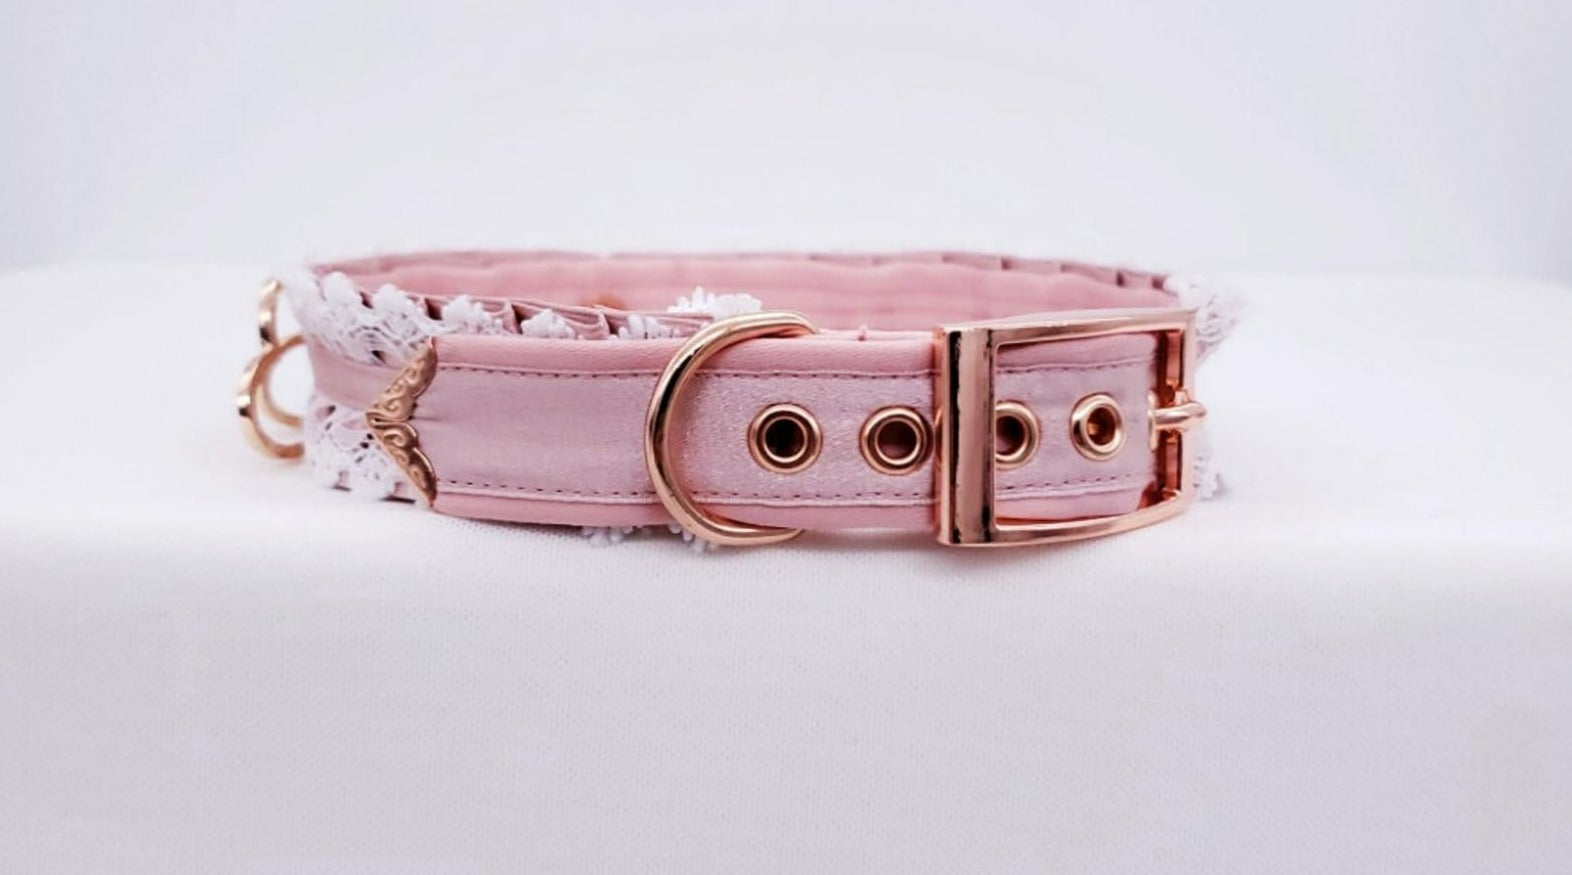 Dusty Rose and White Lace Luxury Rose Gold Collar